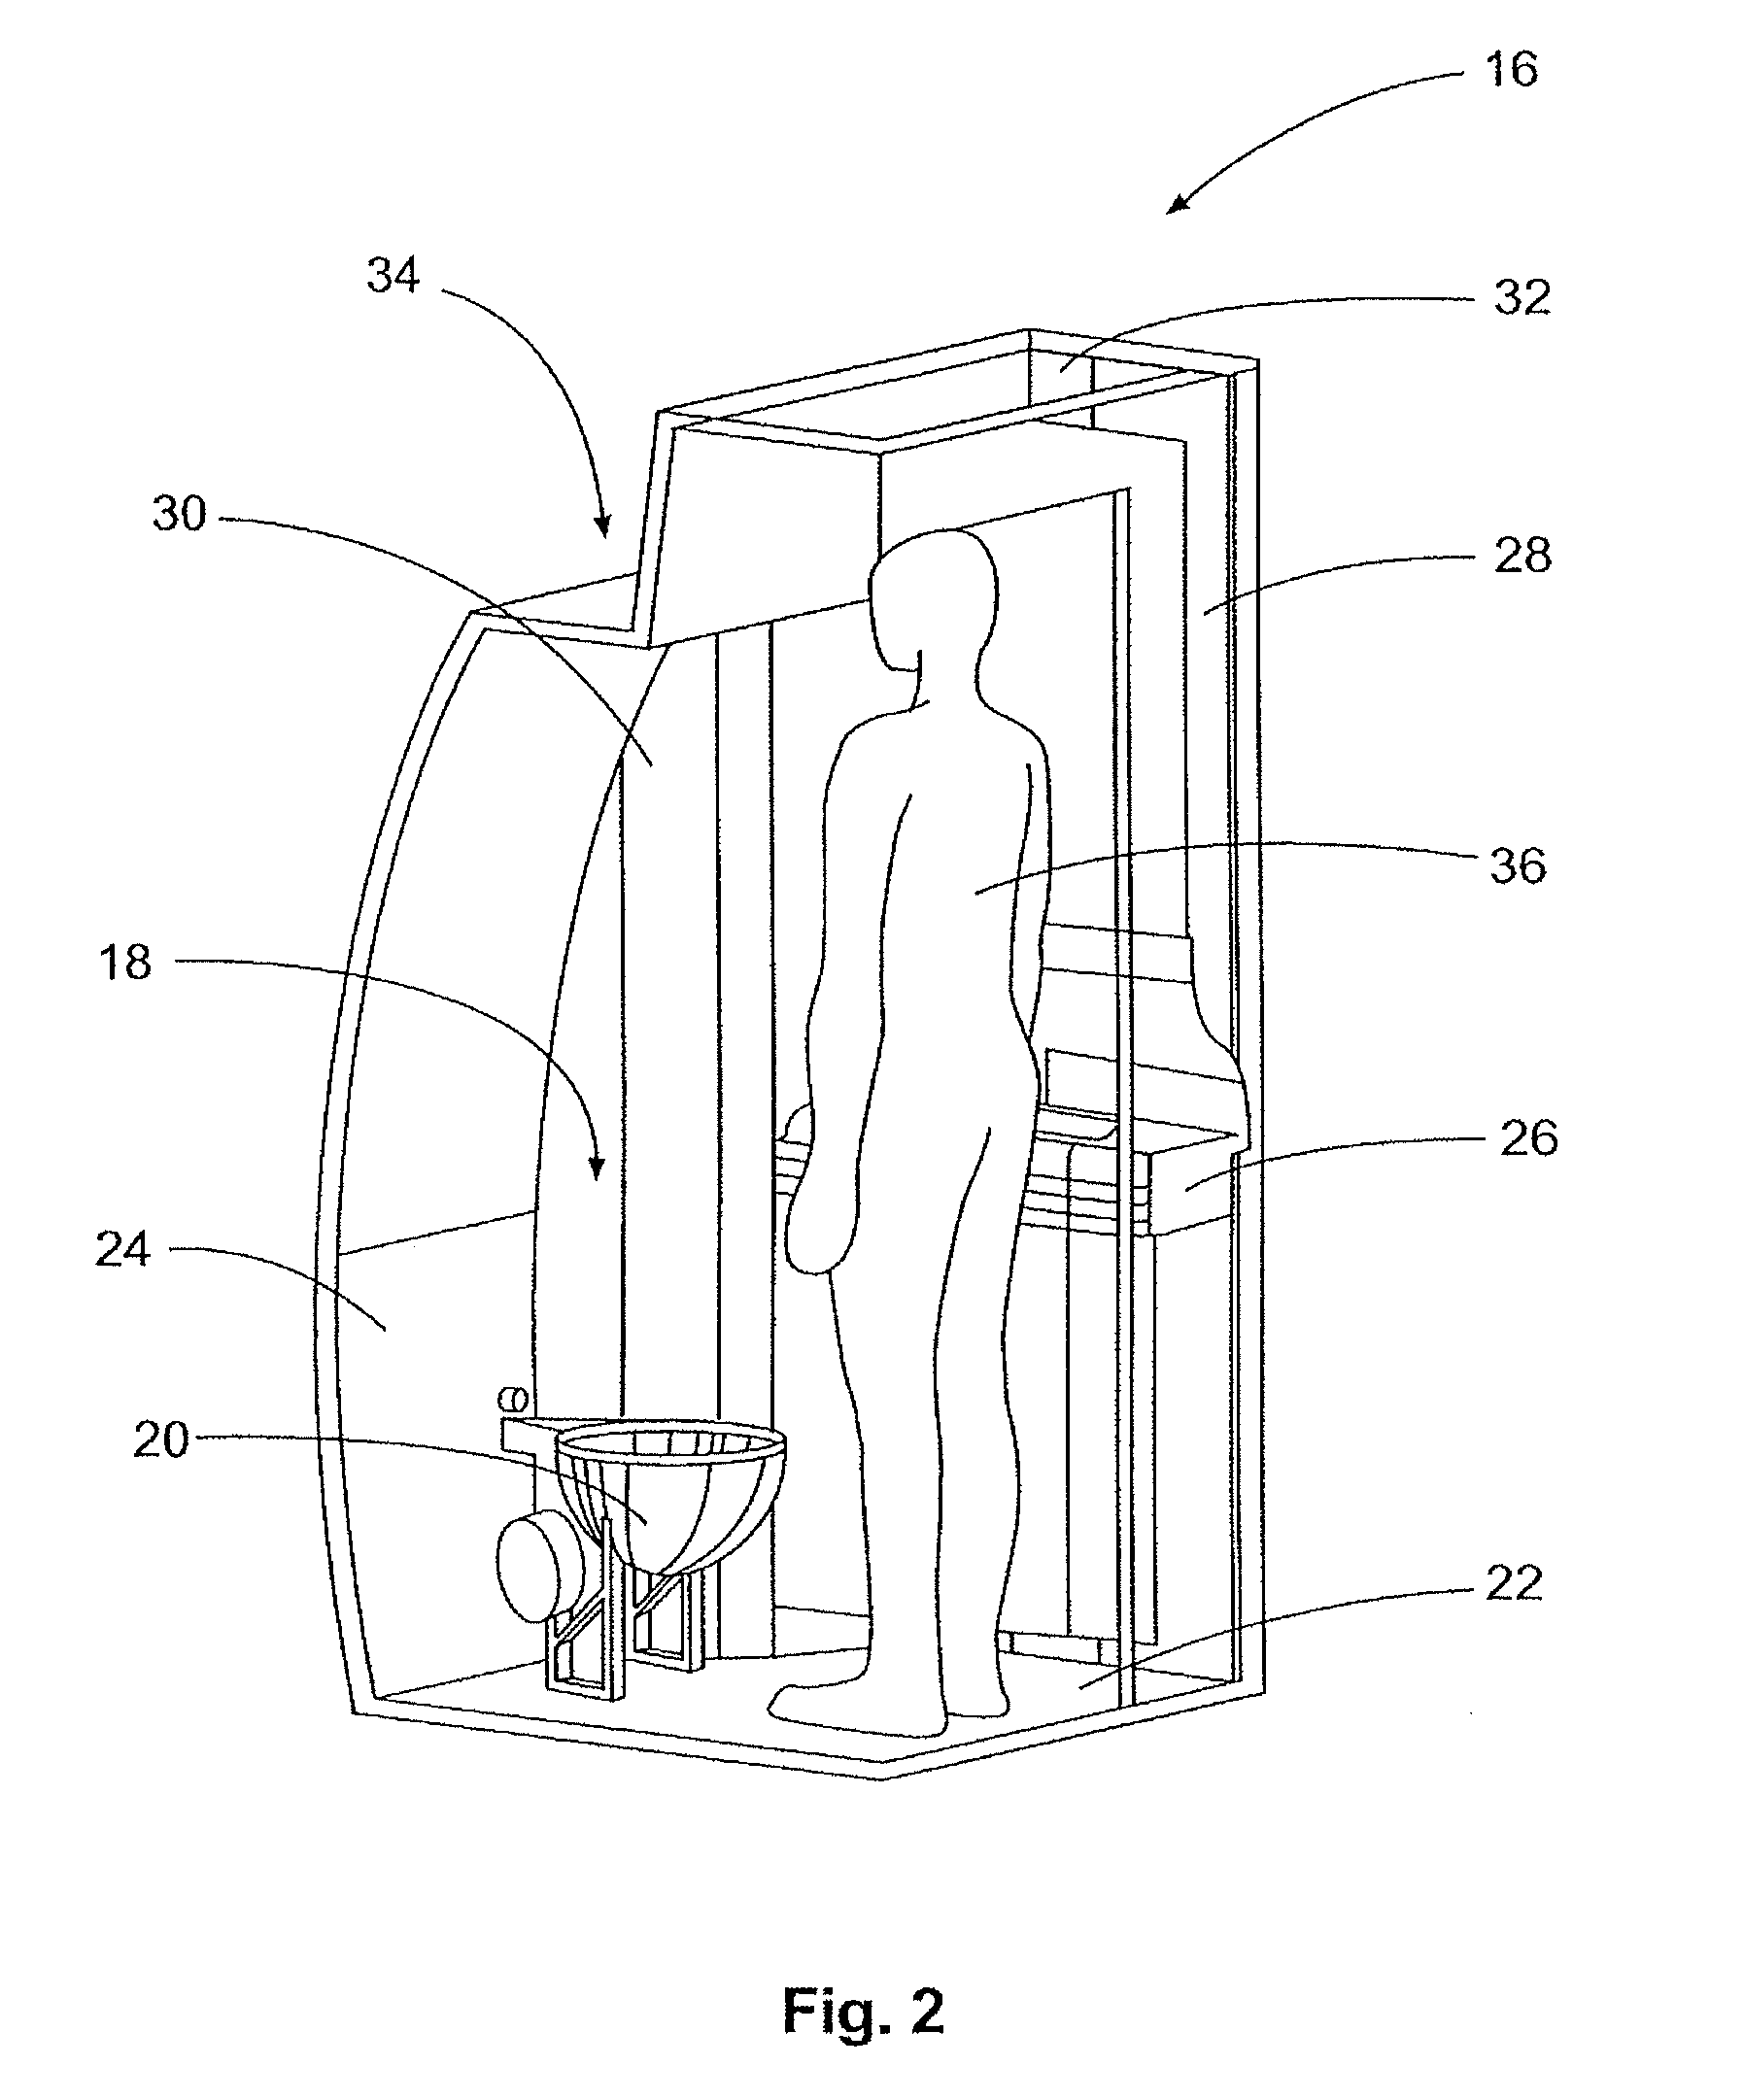 Ergonomic and space-saving arrangement of monuments underneath a rest compartment in an aircraft